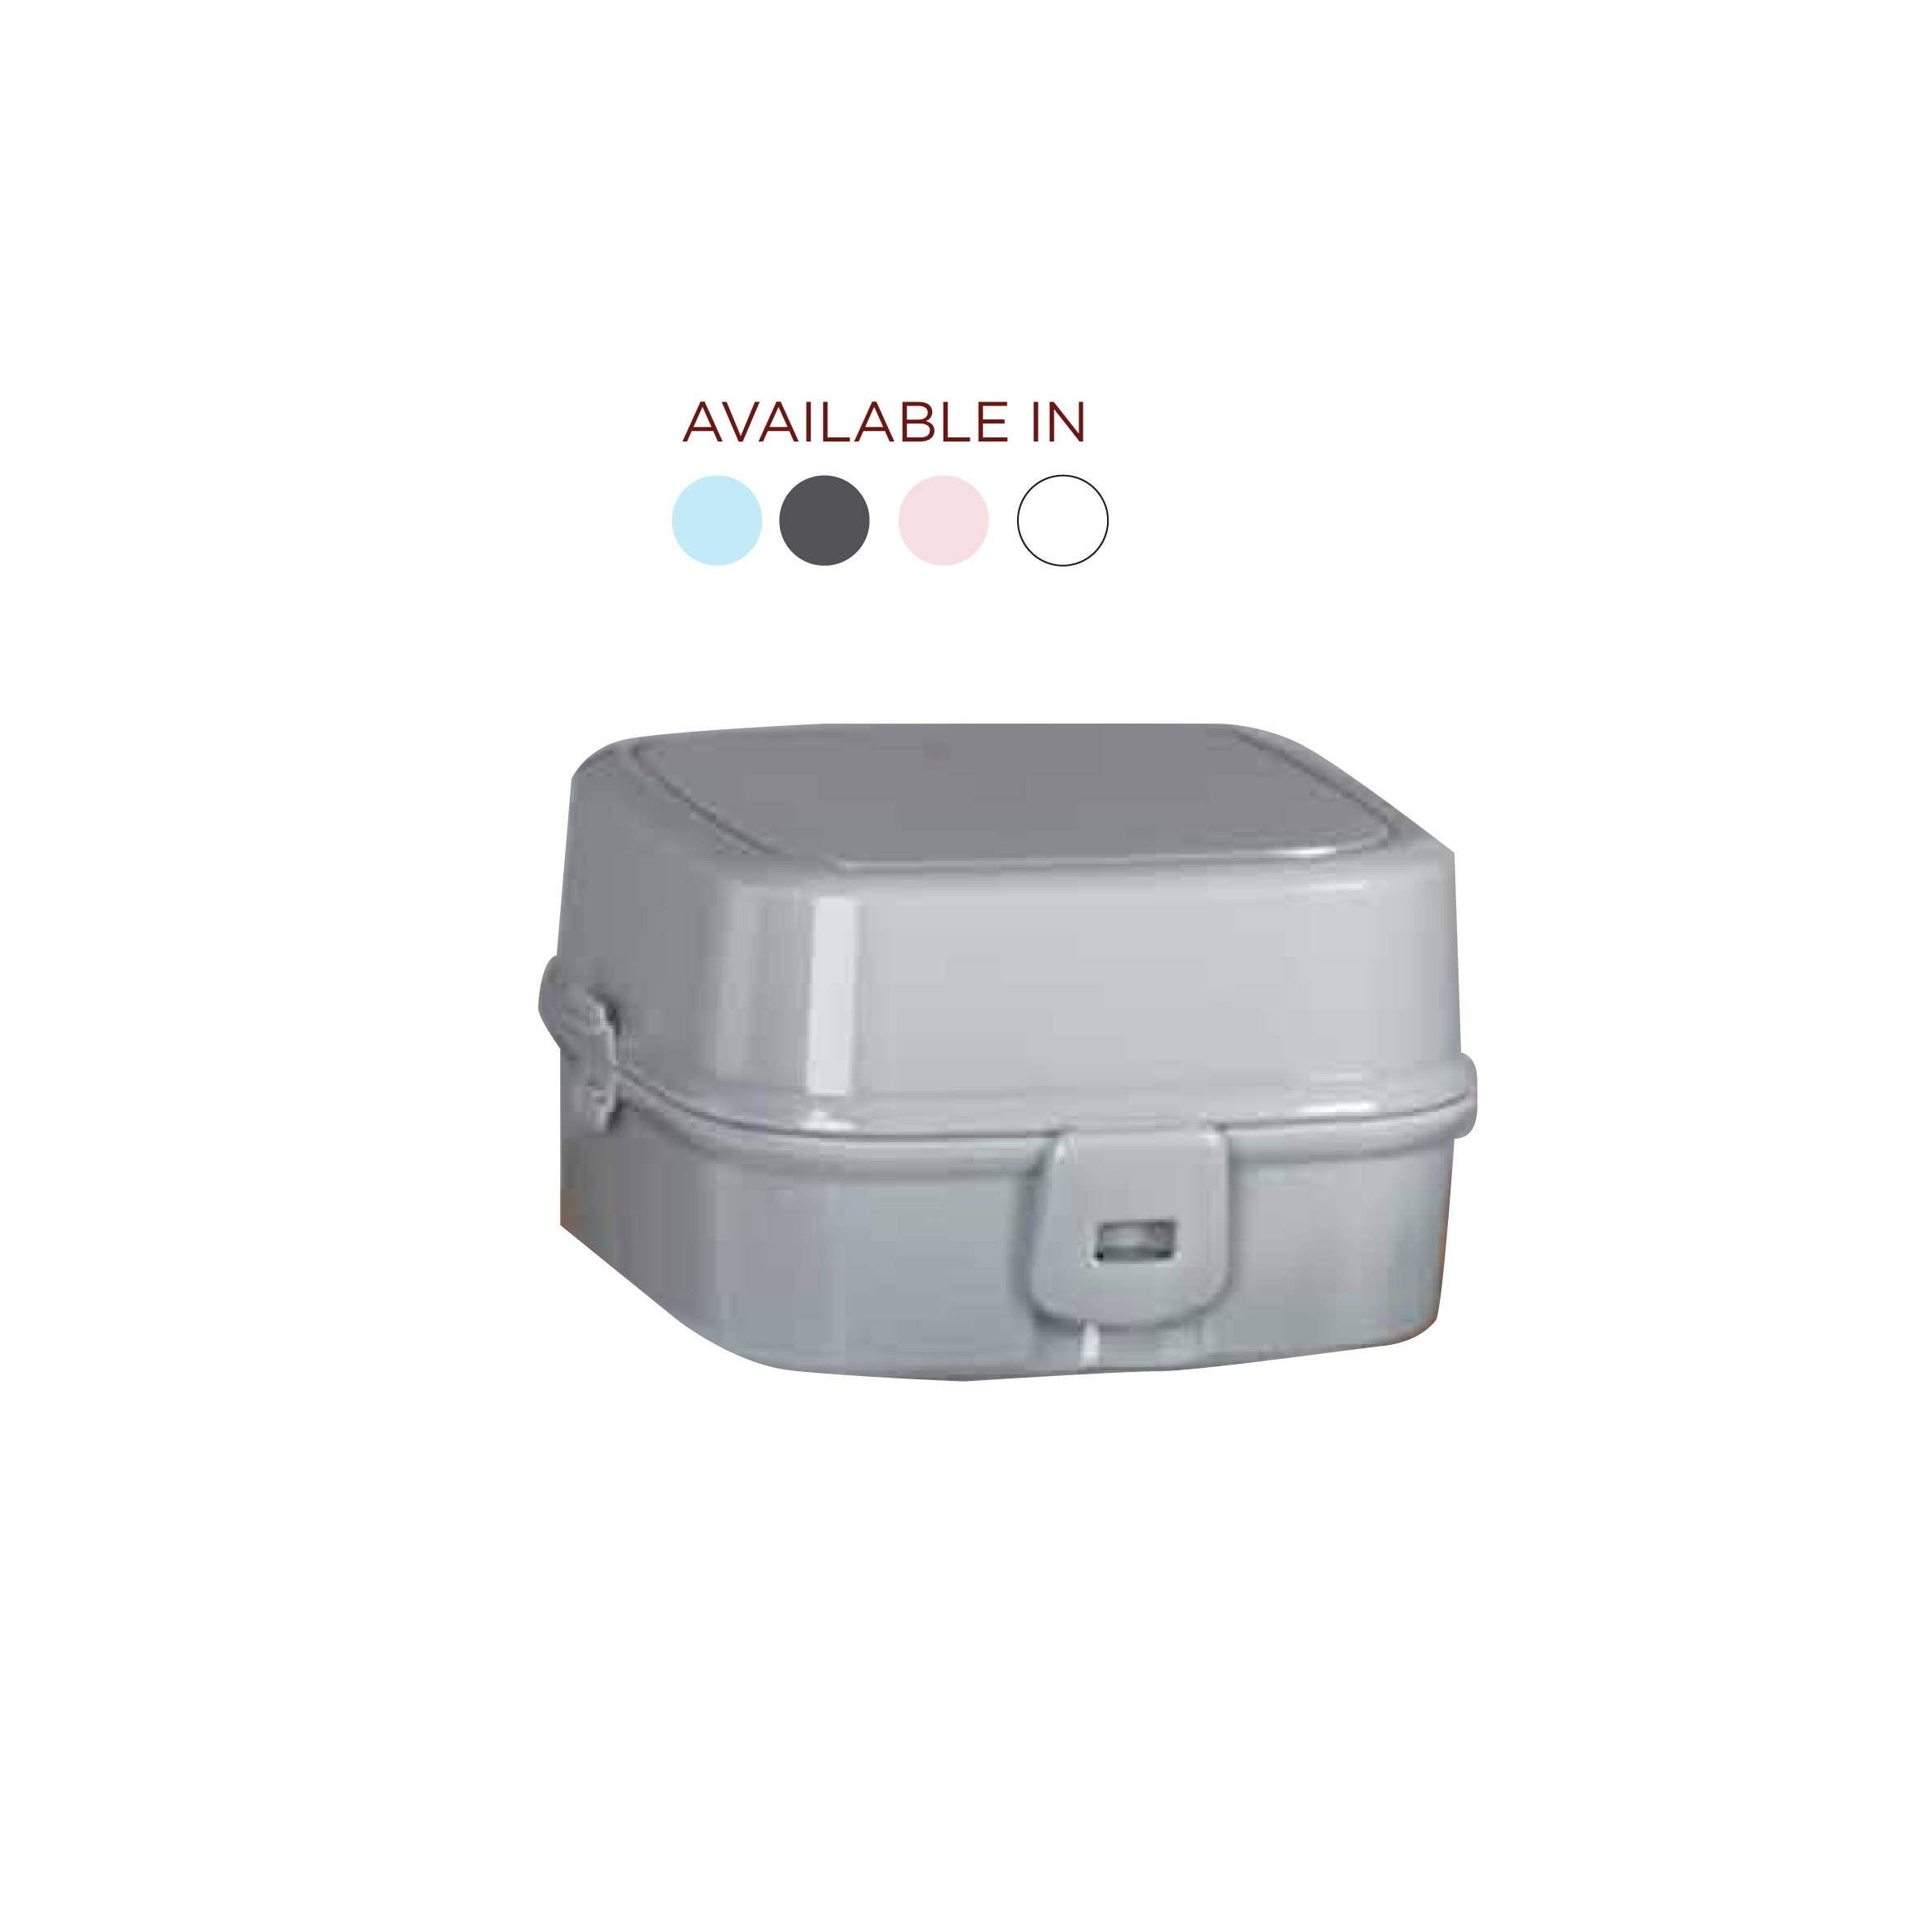 Organizer Kiddy Lunch Box (Available In Blue / Grey / Cream / White), TUR-ORG149